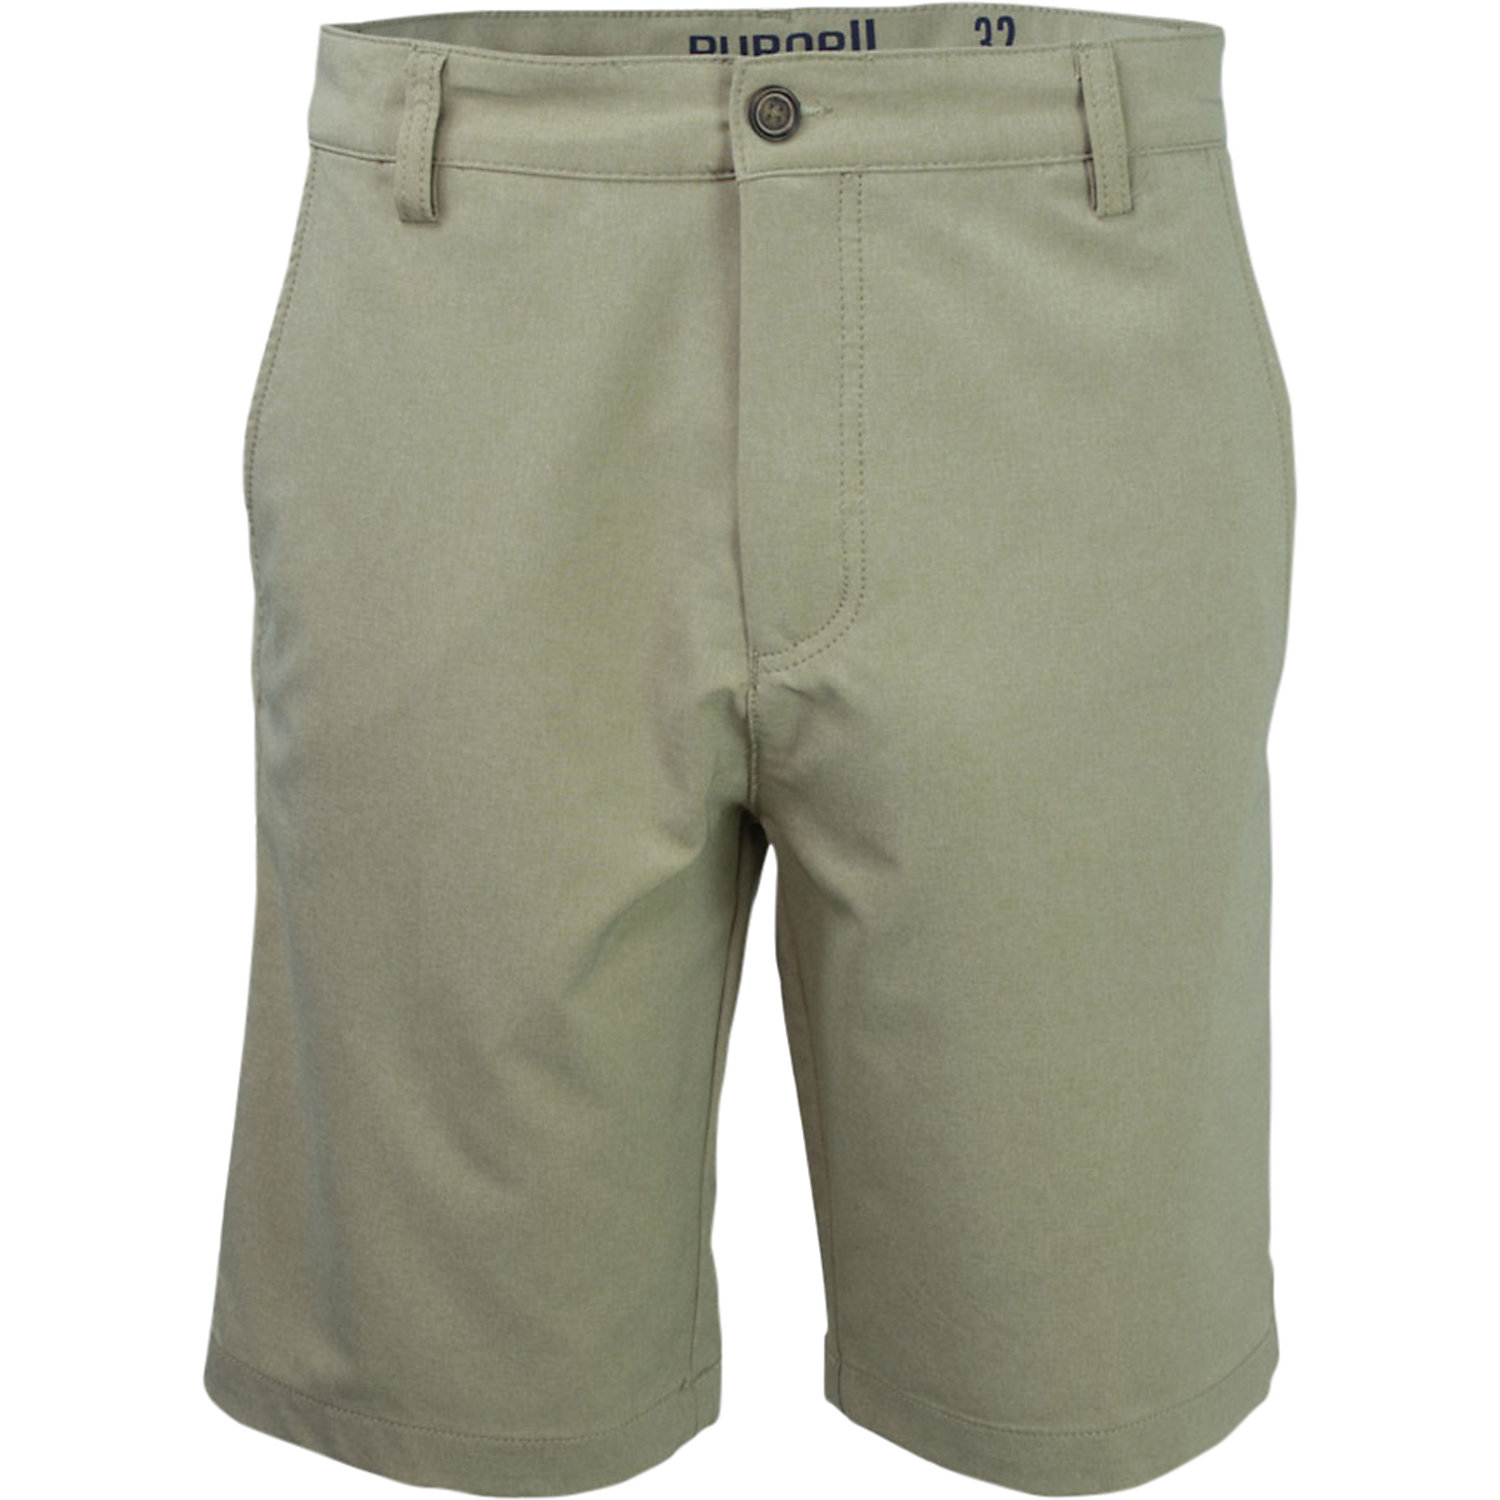 Purnell Mens Heathered QuickDry 10IN Short